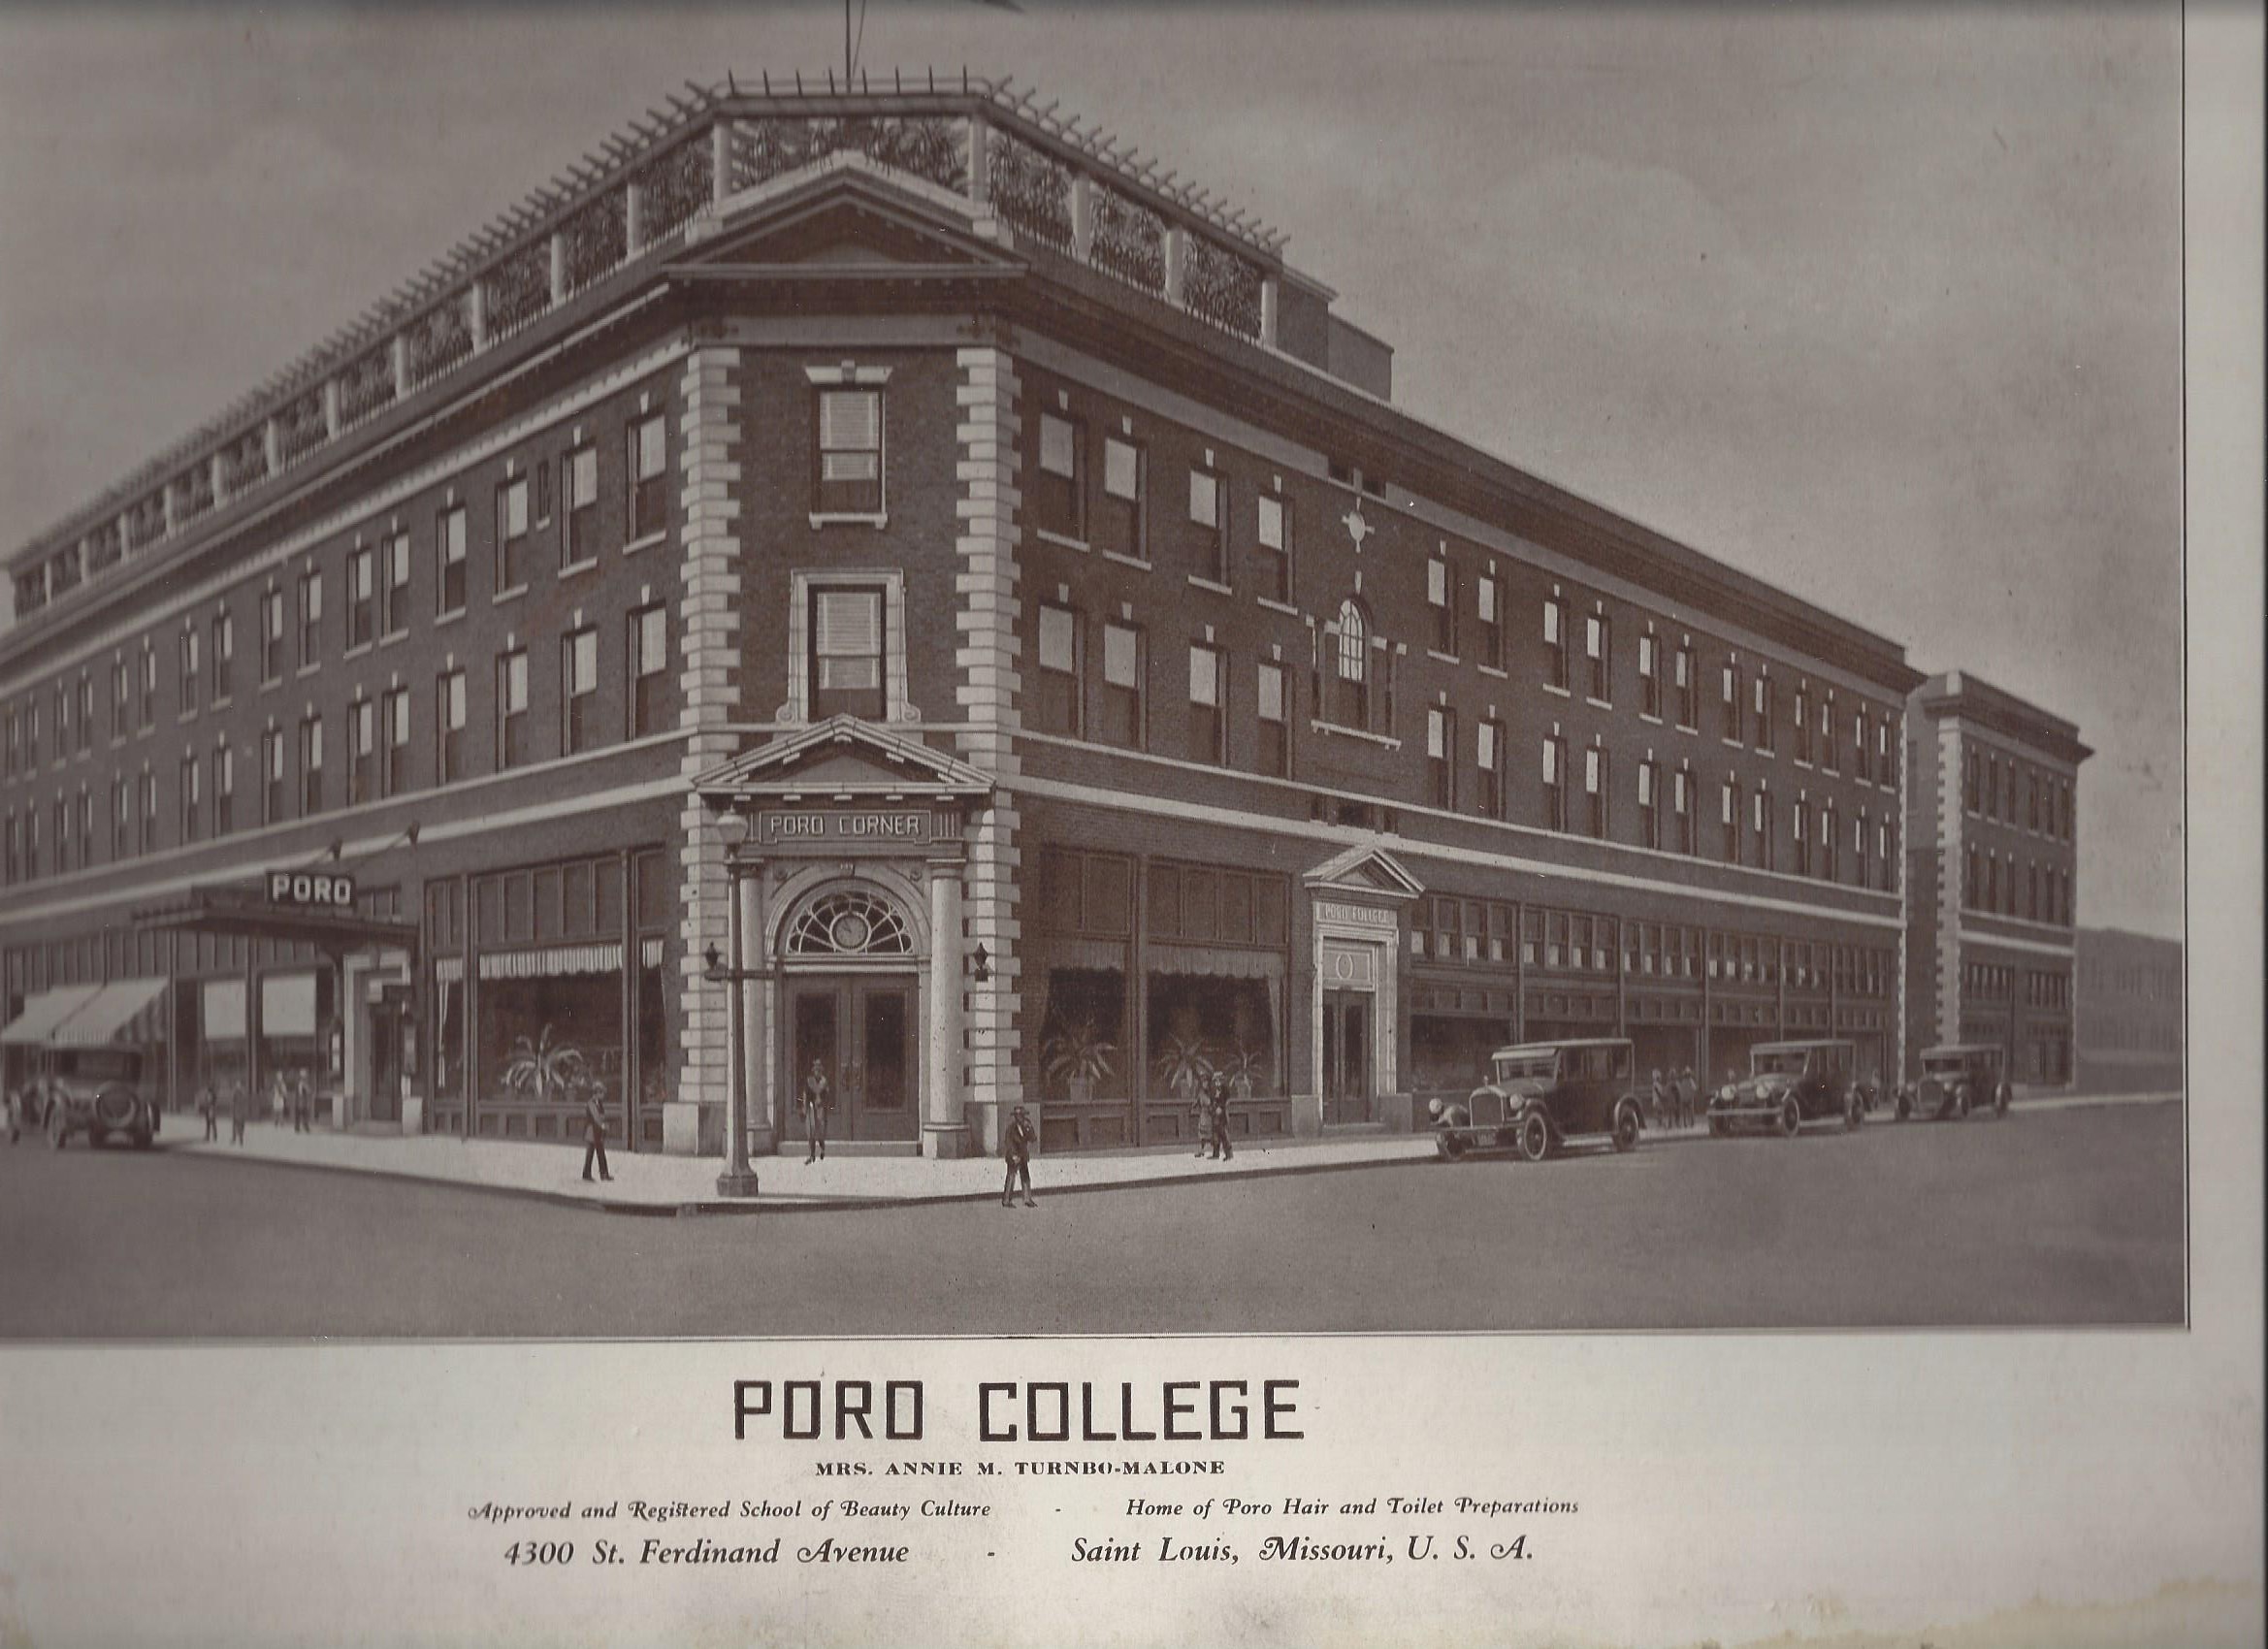 Poro College in St. Louis, opened by Annie Malone in 1918